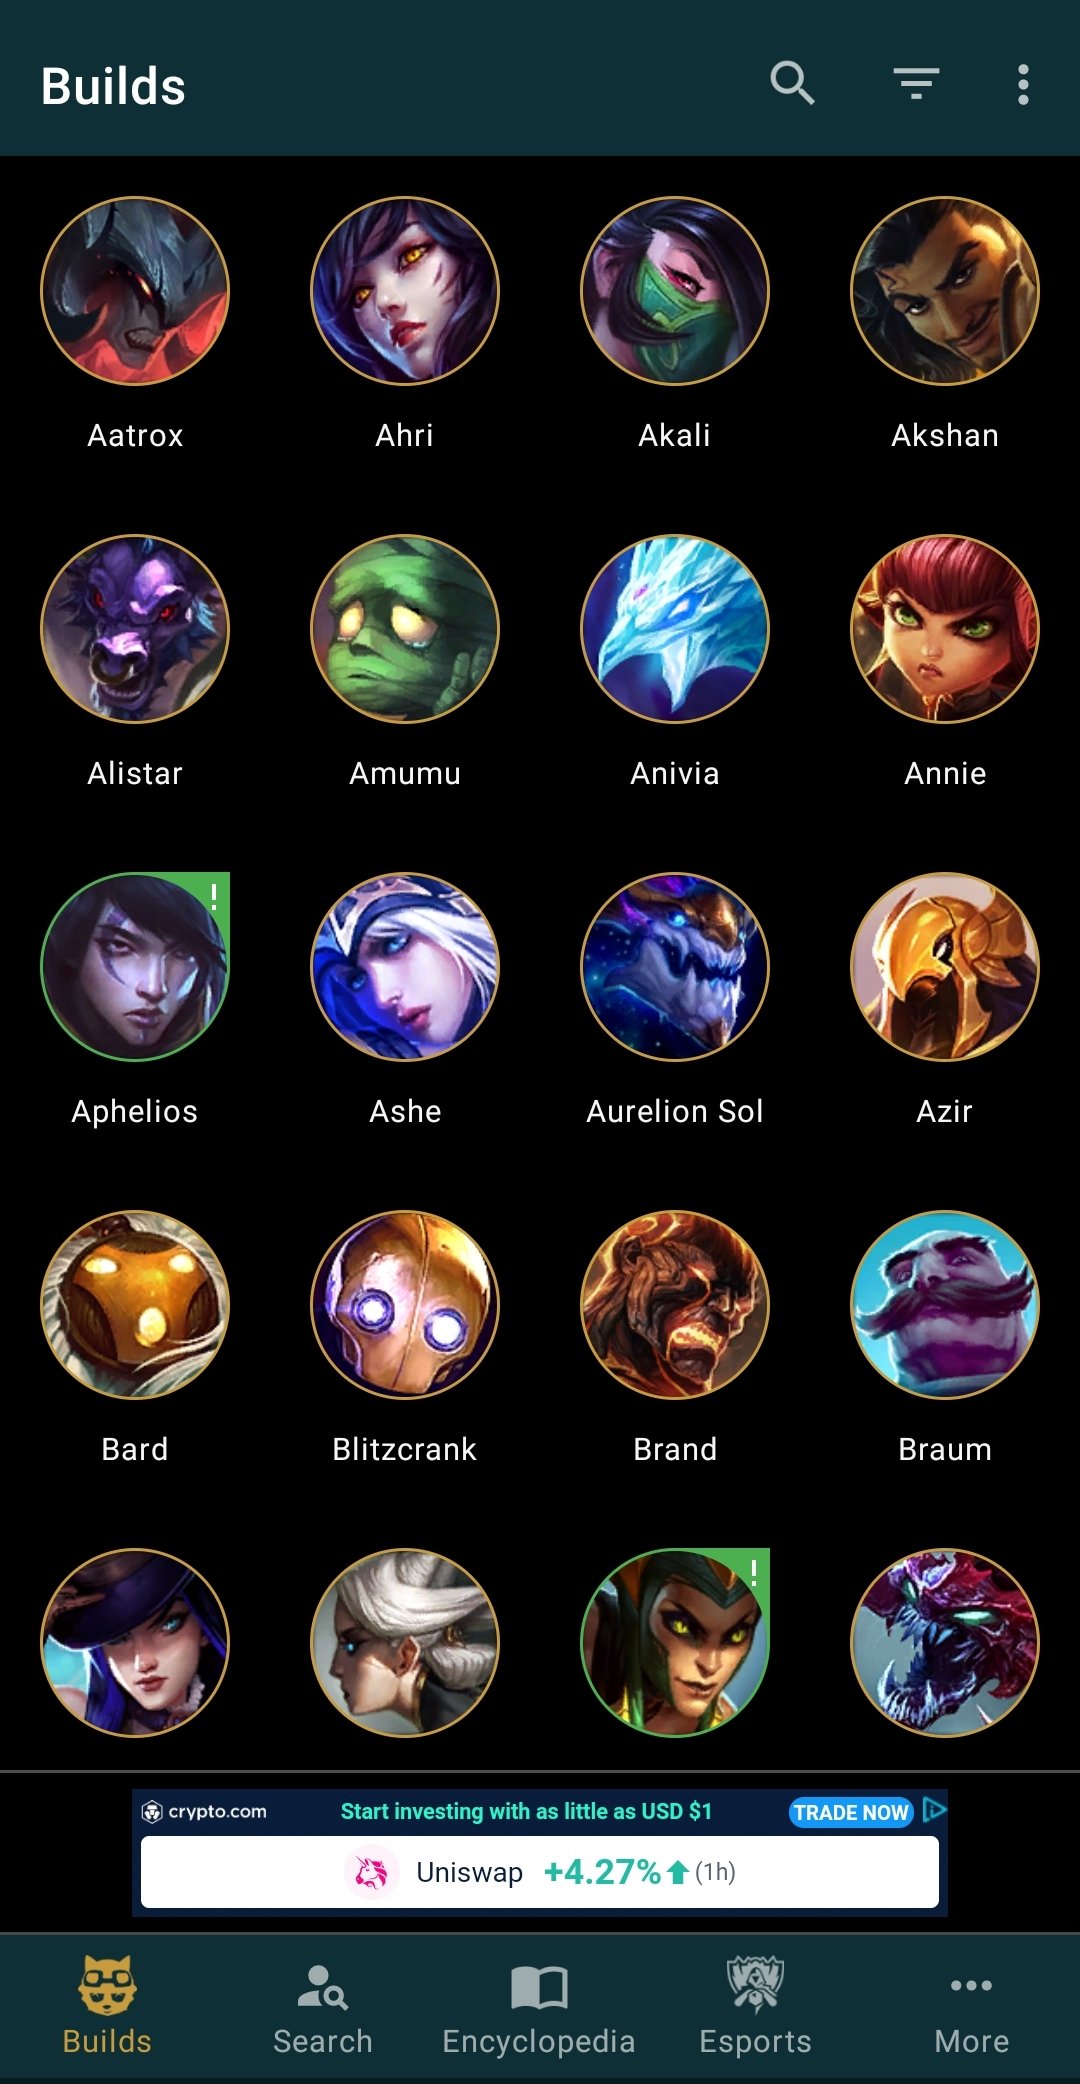 Team Comps for TFT by DAK.GG - APK Download for Android